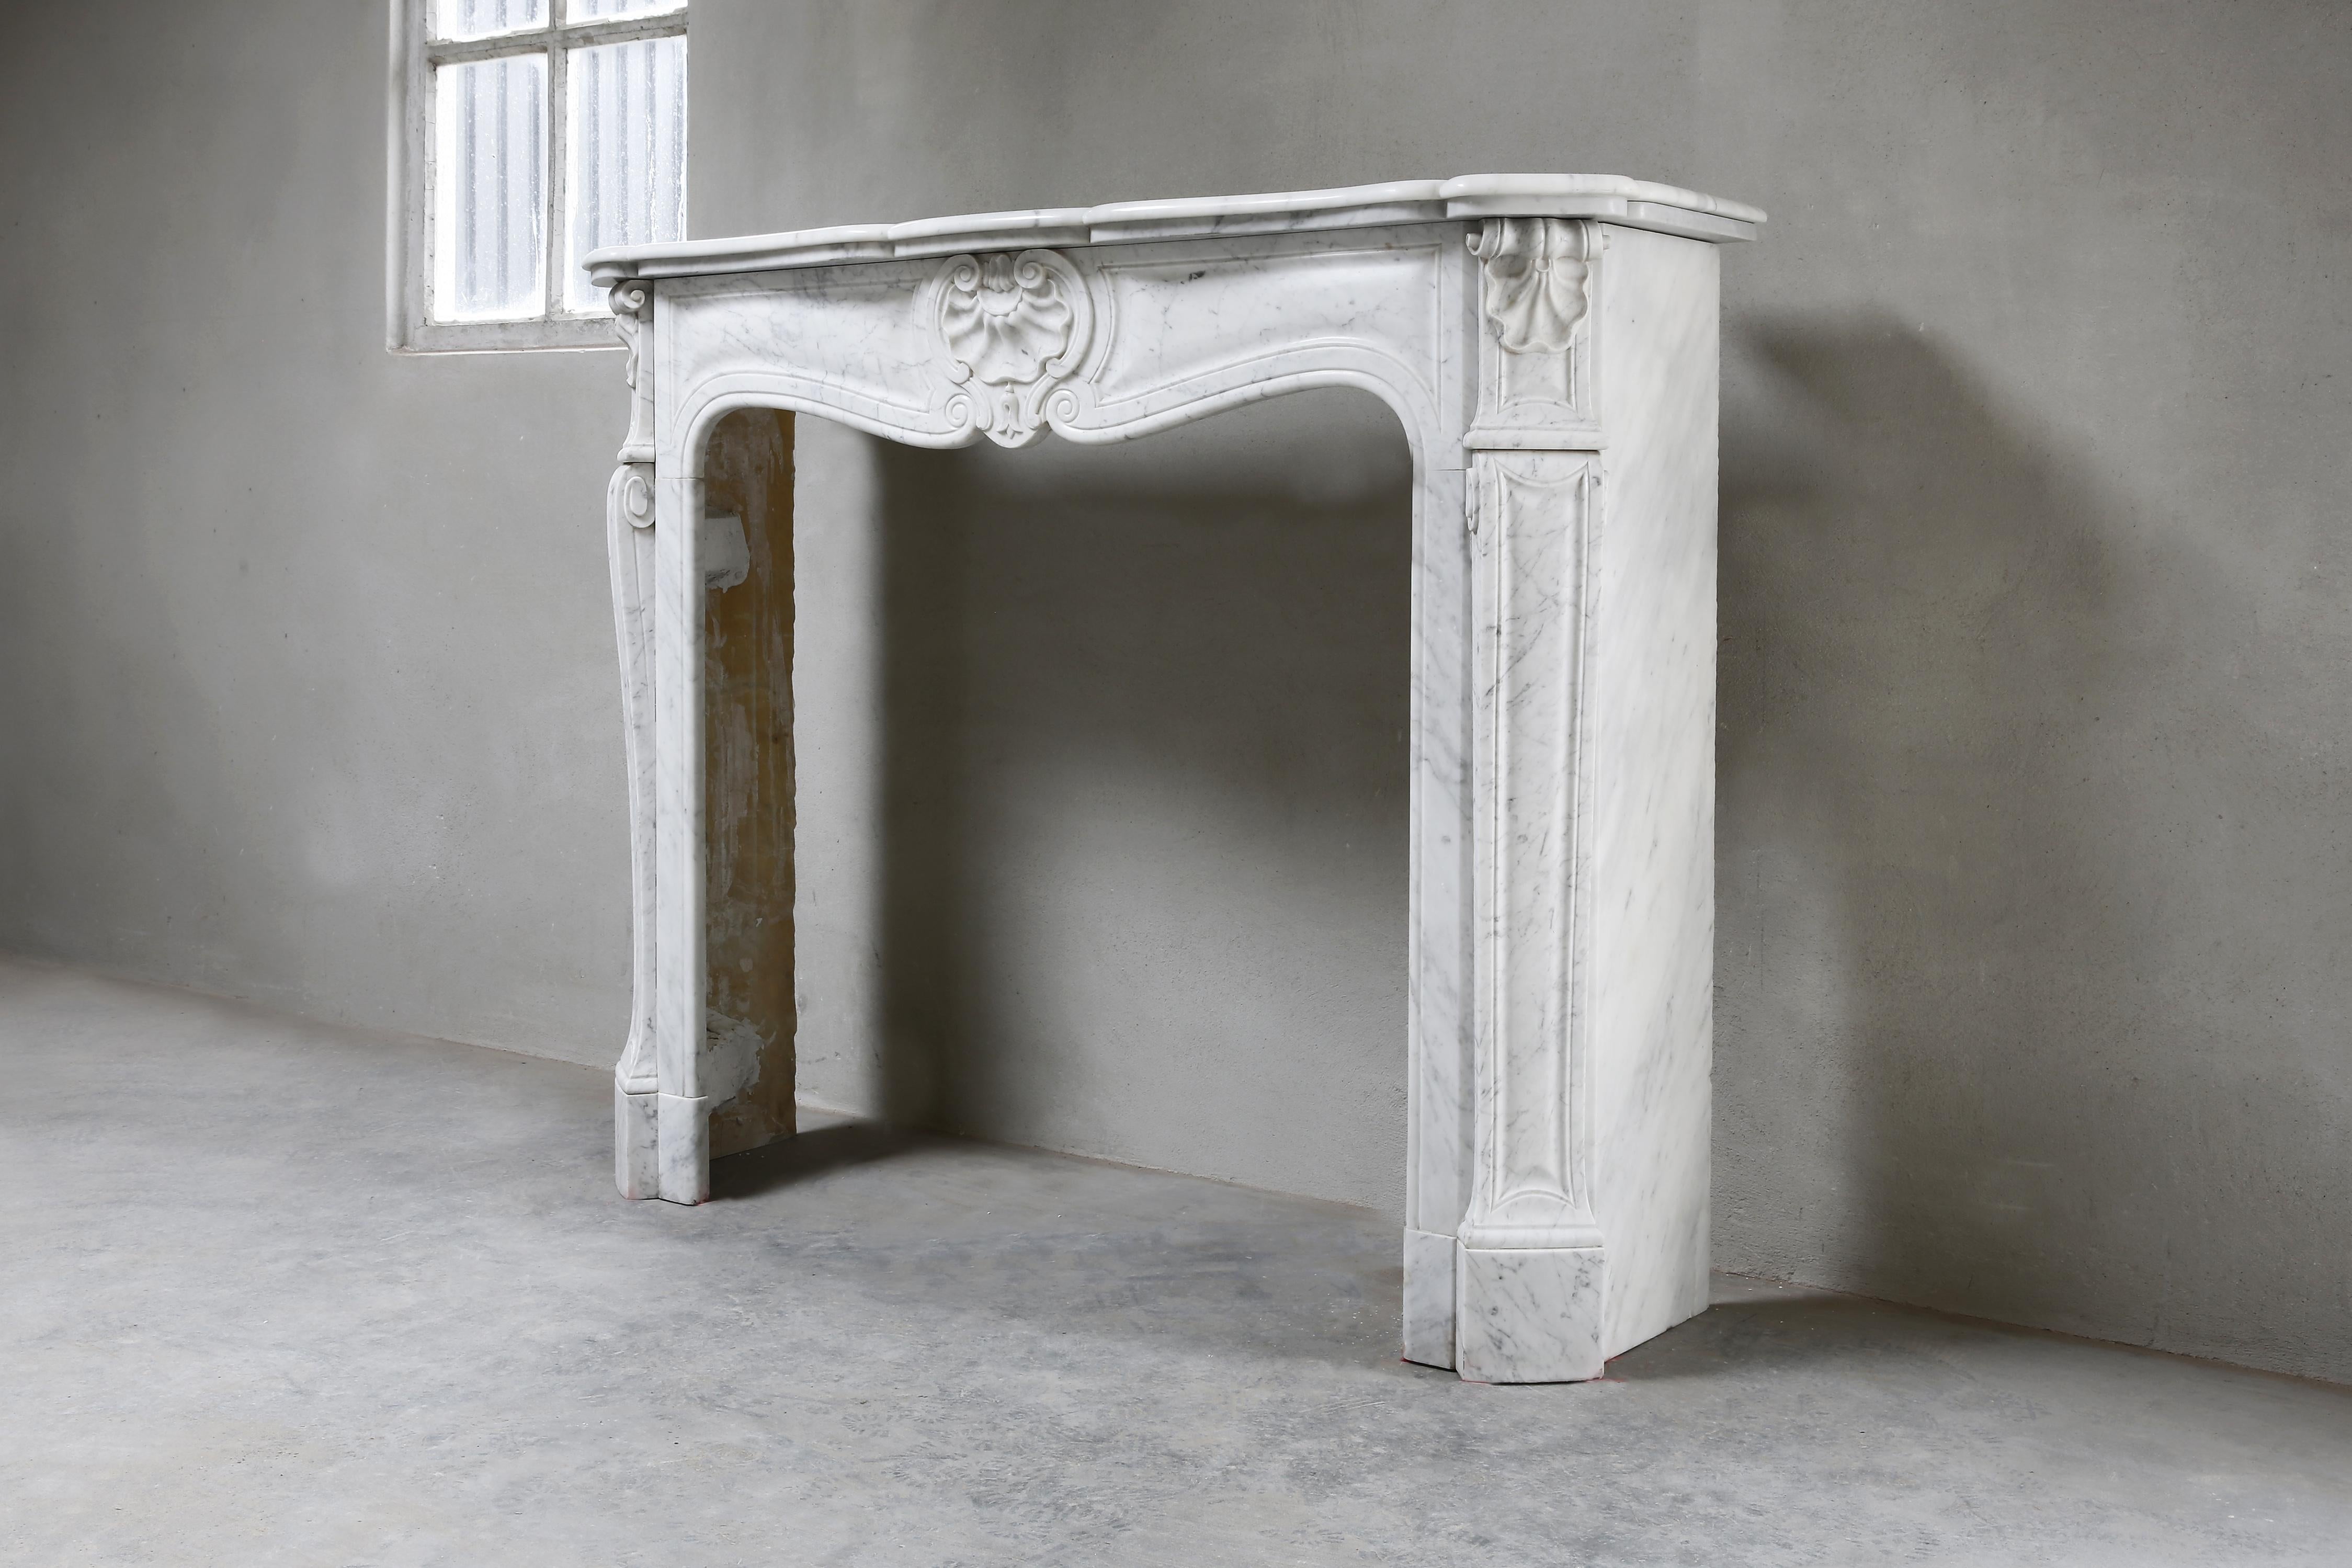 Beautiful elegant antique Carrara marble fireplace surround from the early 20th century in the style of Louis XV. This mantelpiece is decorated with a scallop in the center and on the sides. The light veins, white Carrara marble and round shape give